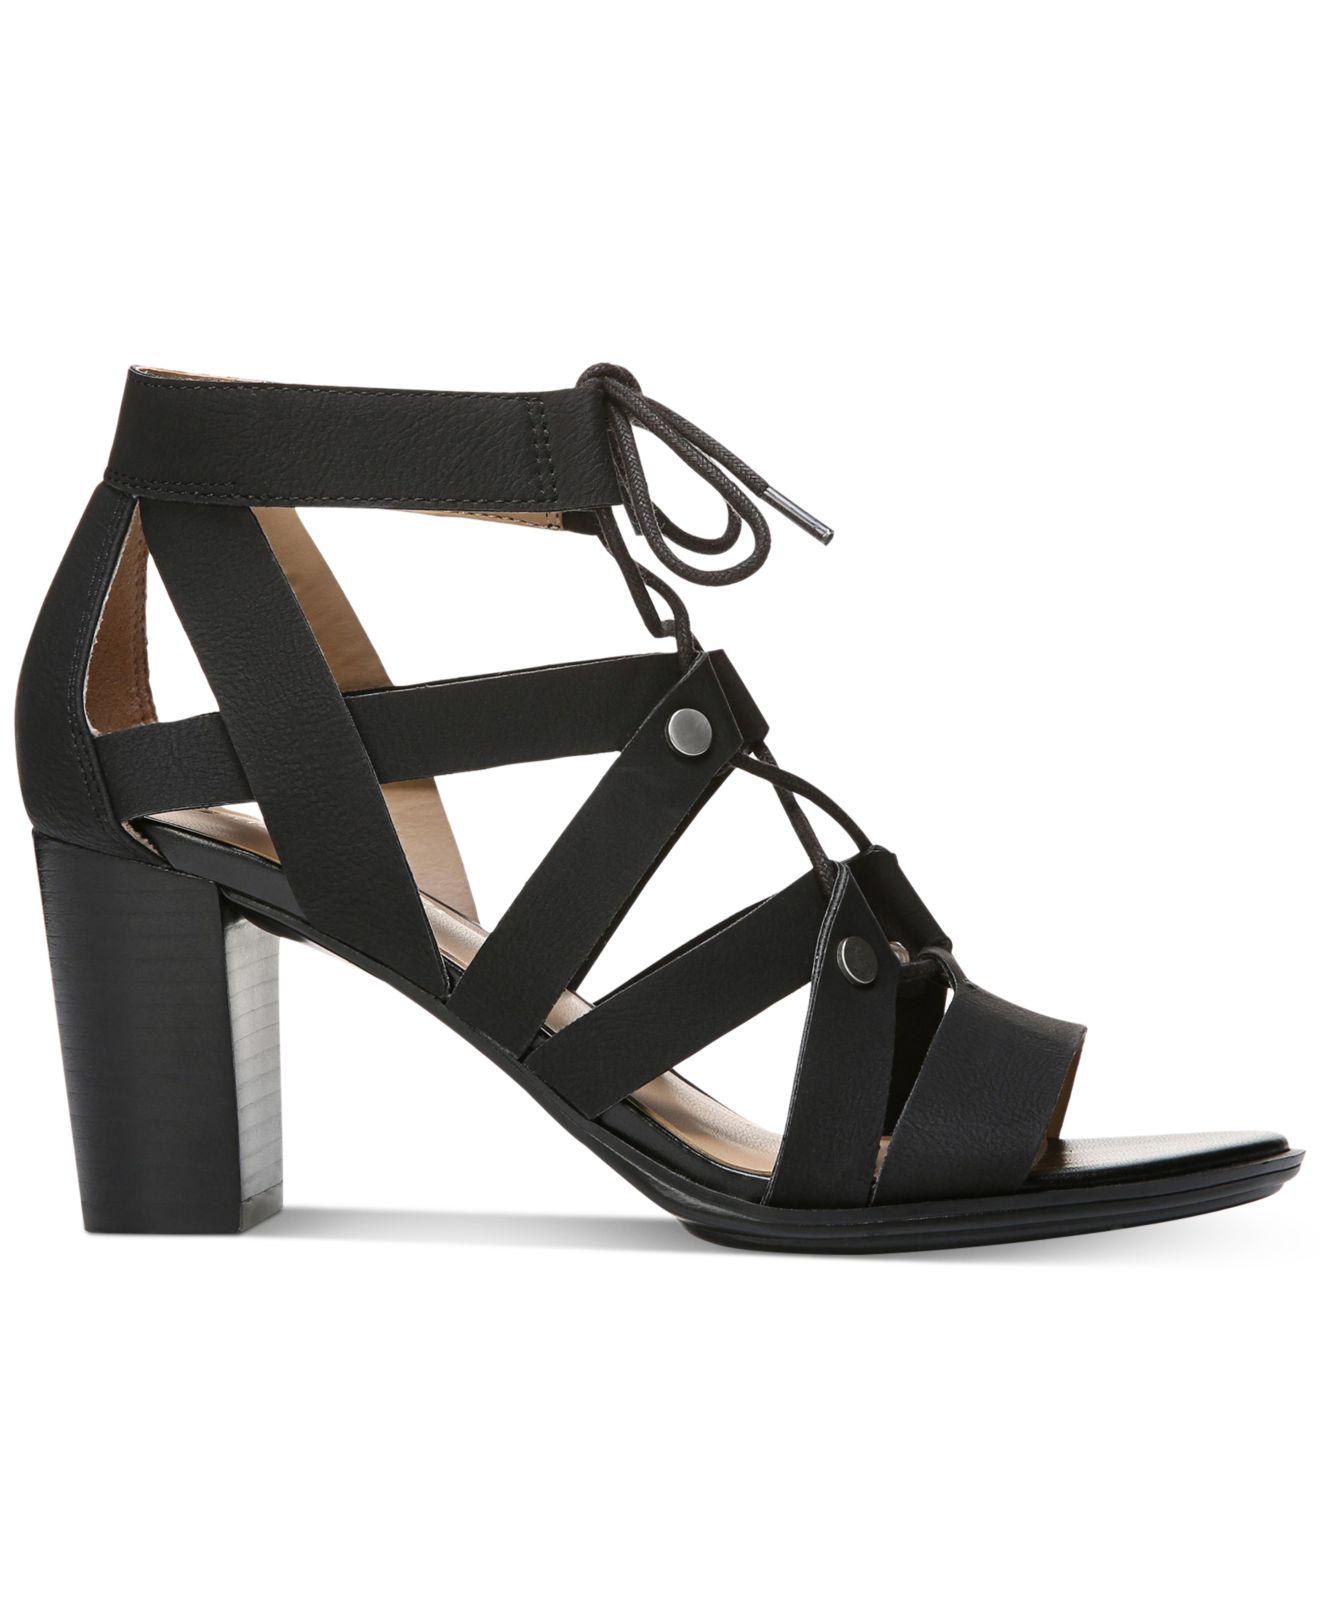 Lyst - Naturalizer London Lace-up Block-heel Sandals in Black